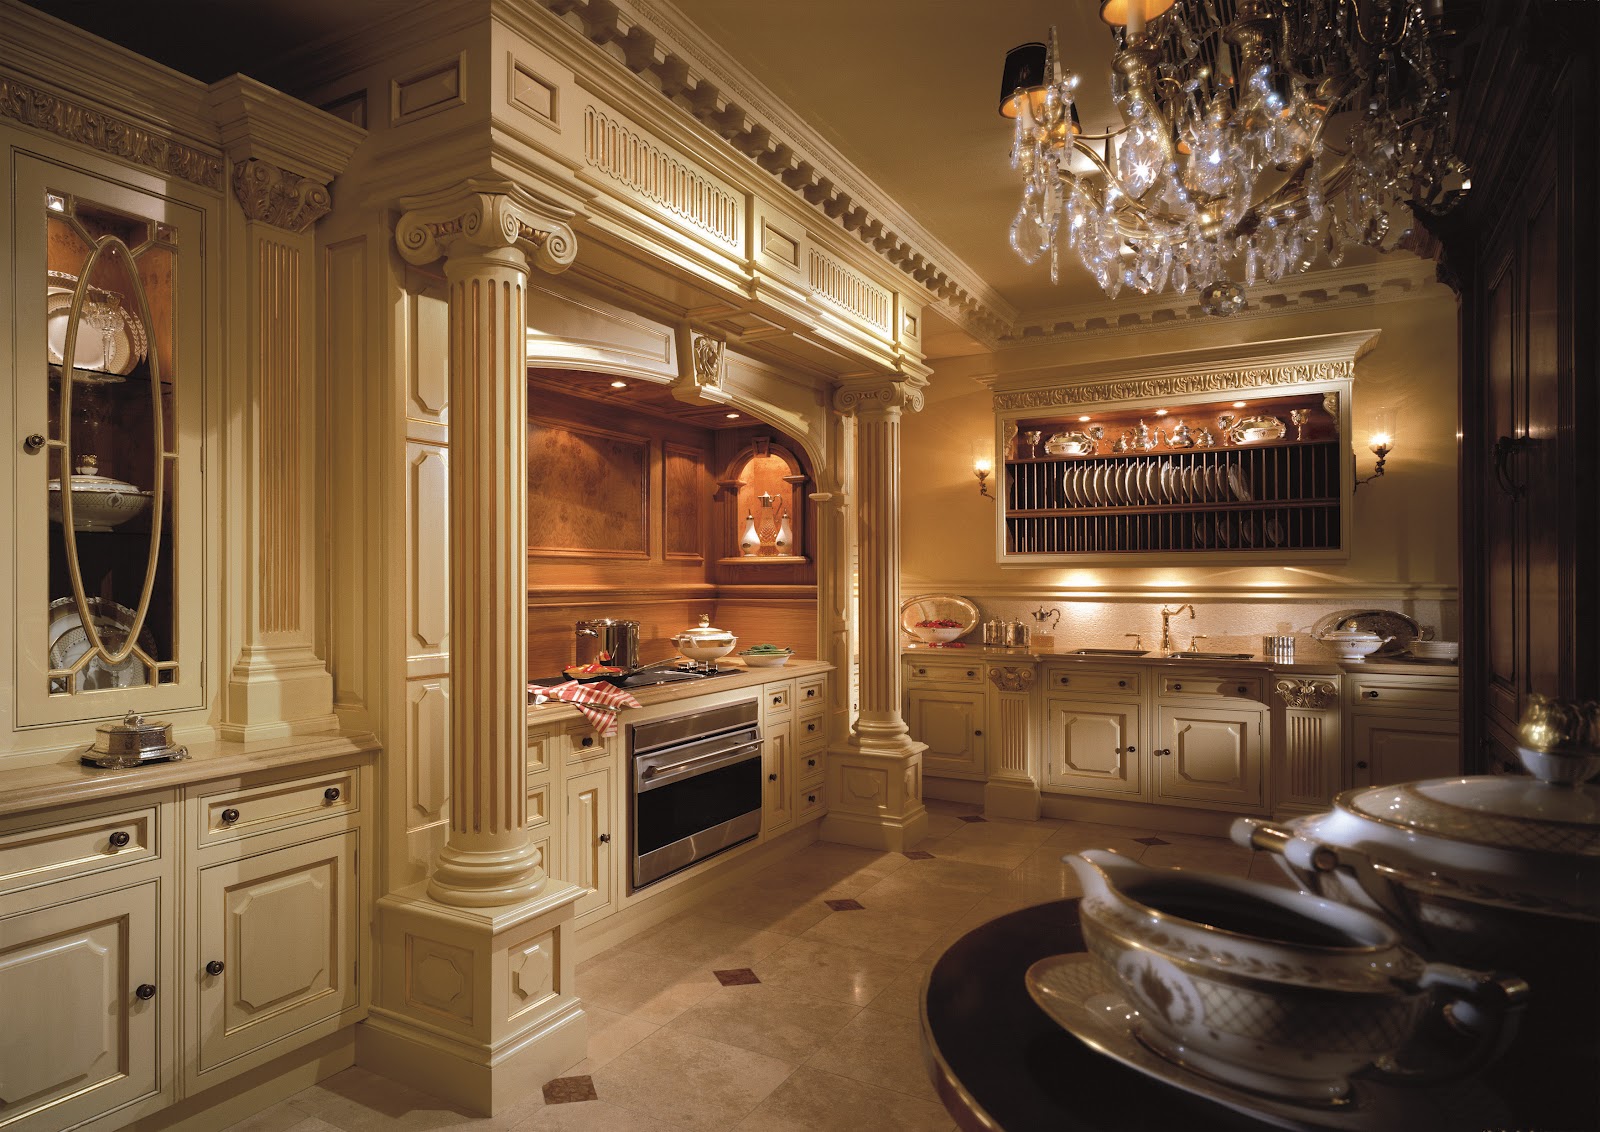 The Sheraton Edwardian Buttermilk Kitchen Is A Traditional InFrame